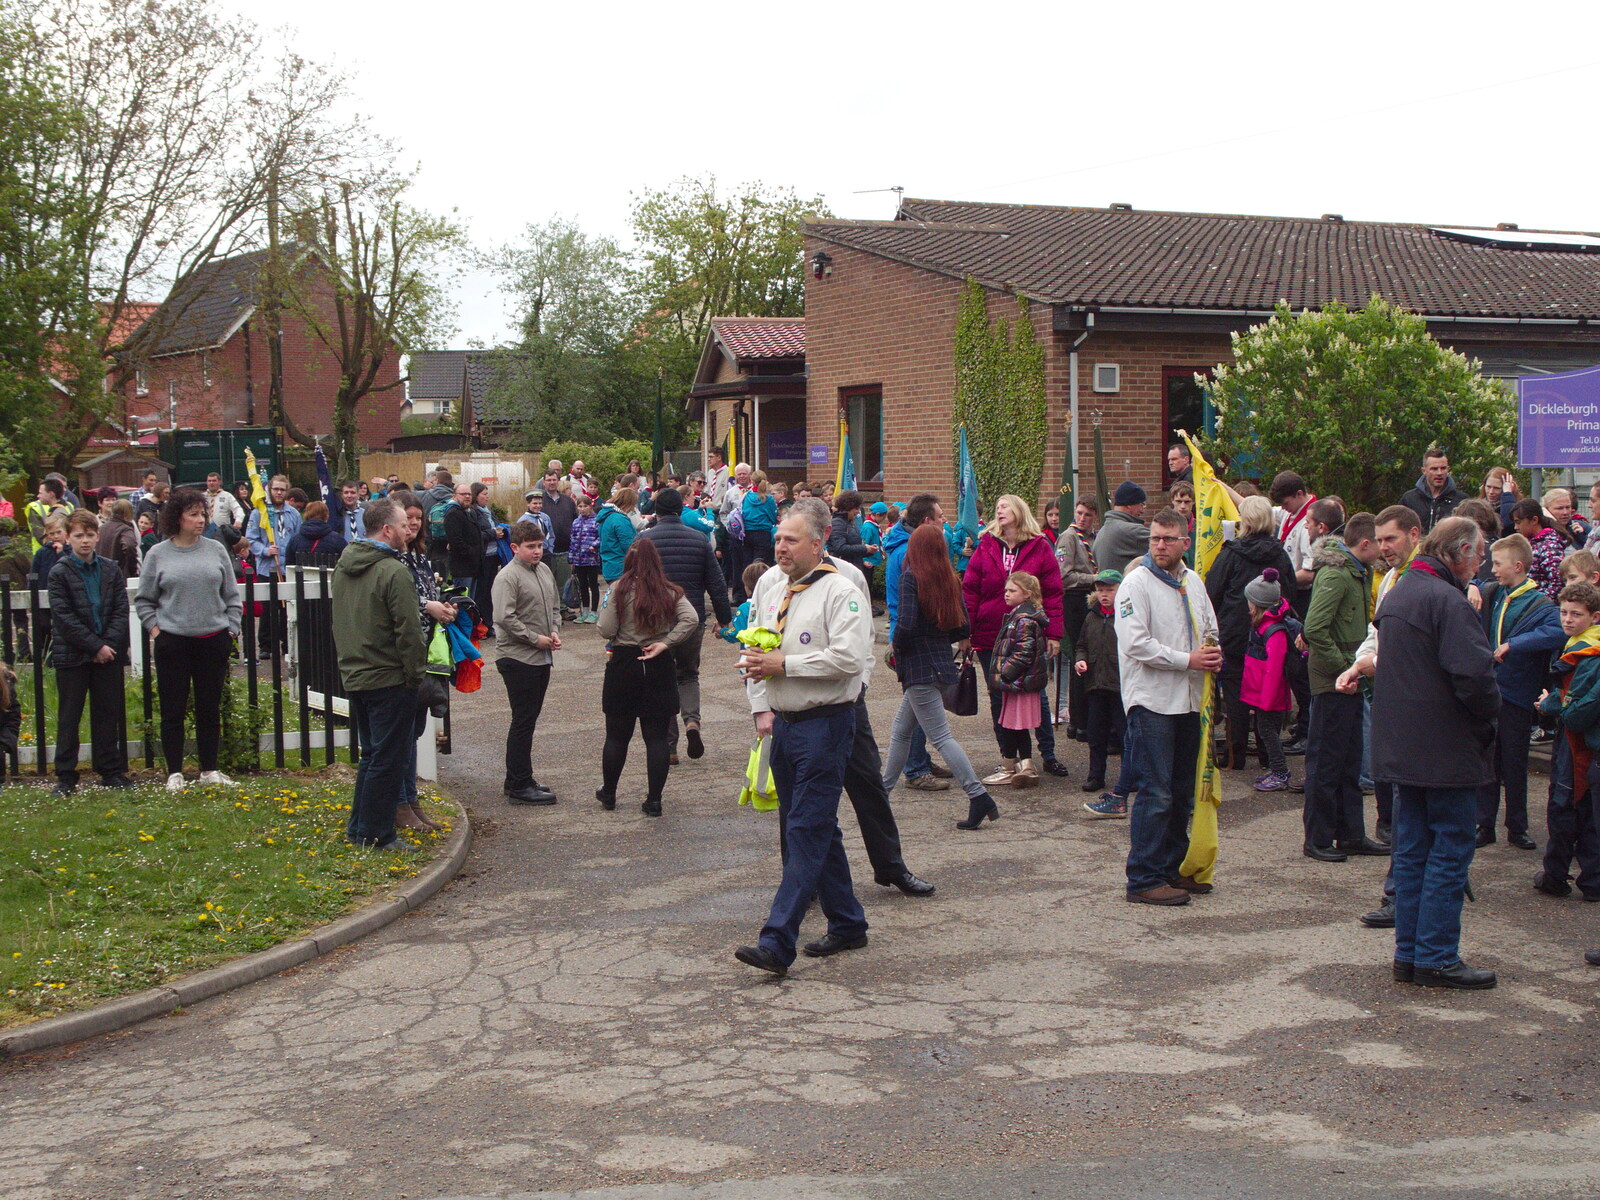 Milling around at the school from A St. George's Day Parade, Dickleburgh, Norfolk - 28th April 2019